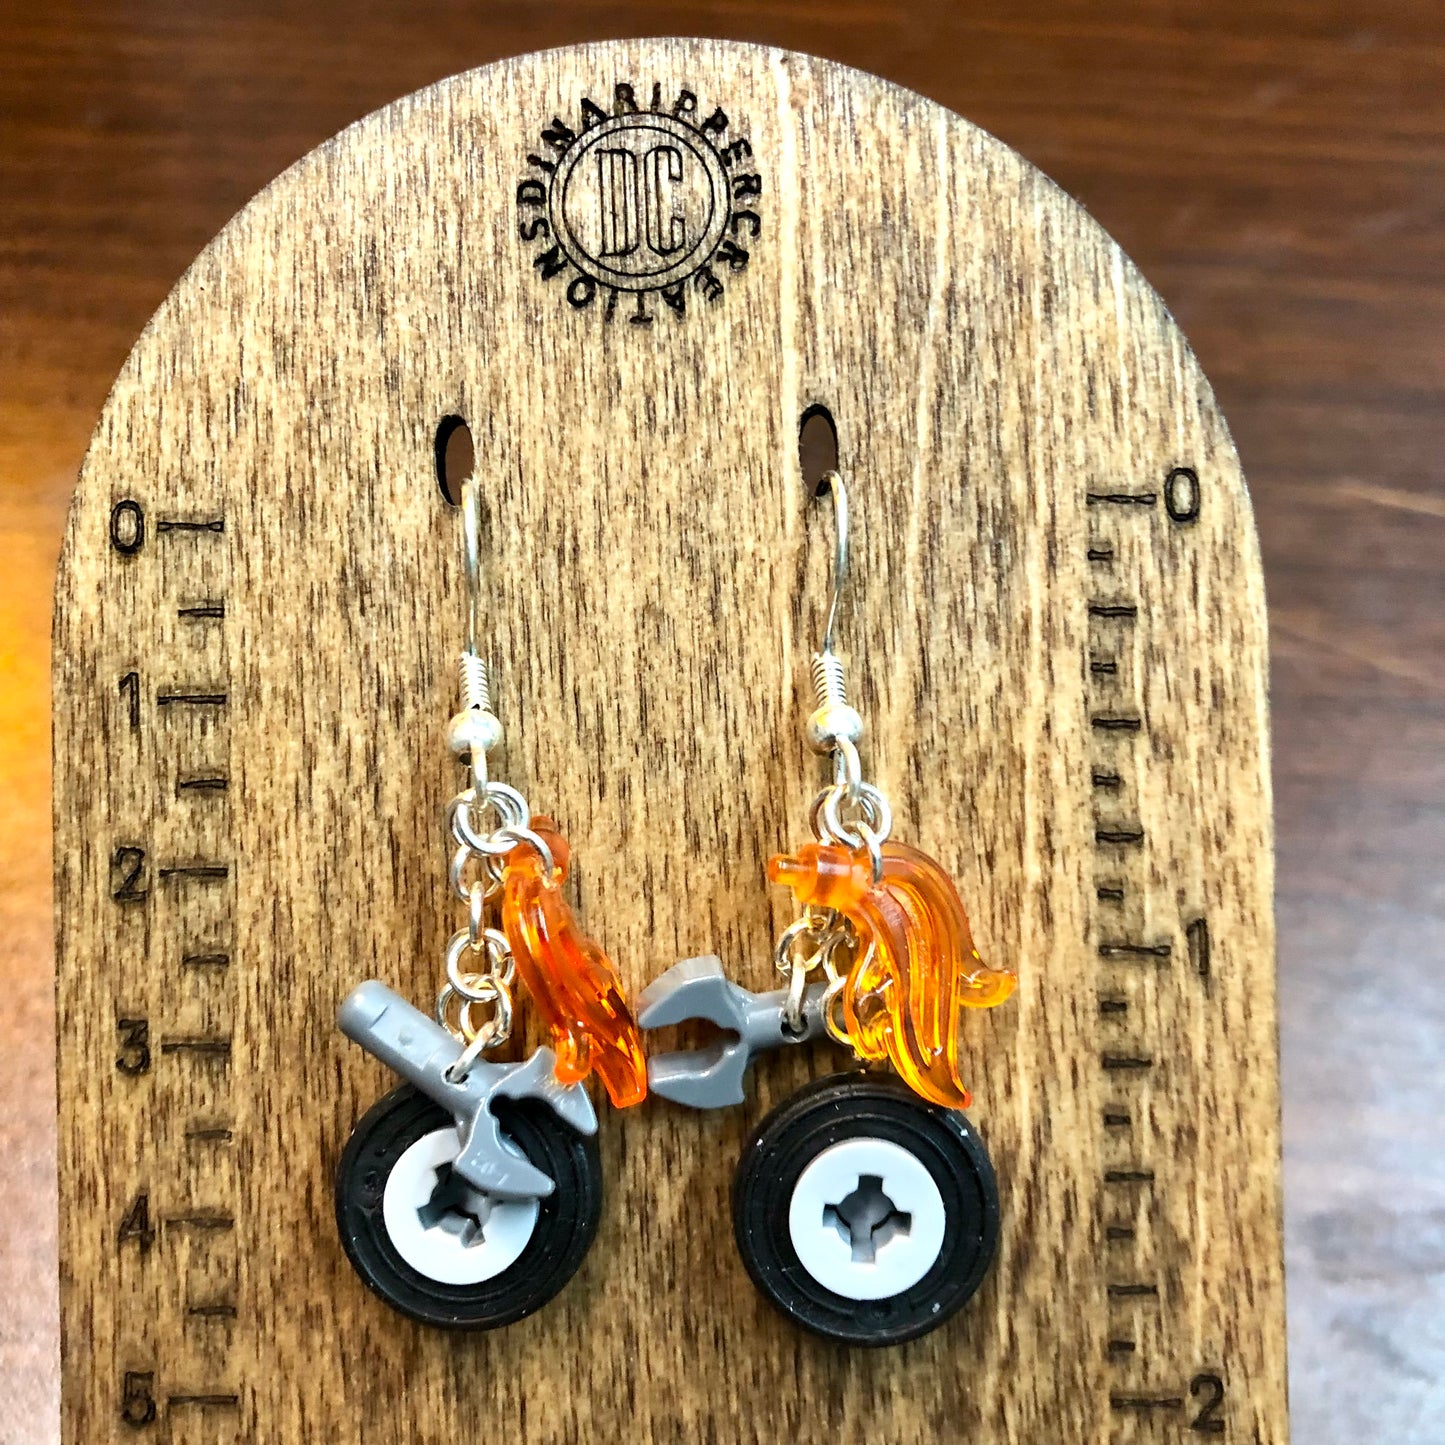 Up-Cycled Novelty Earrings - Assorted Materials